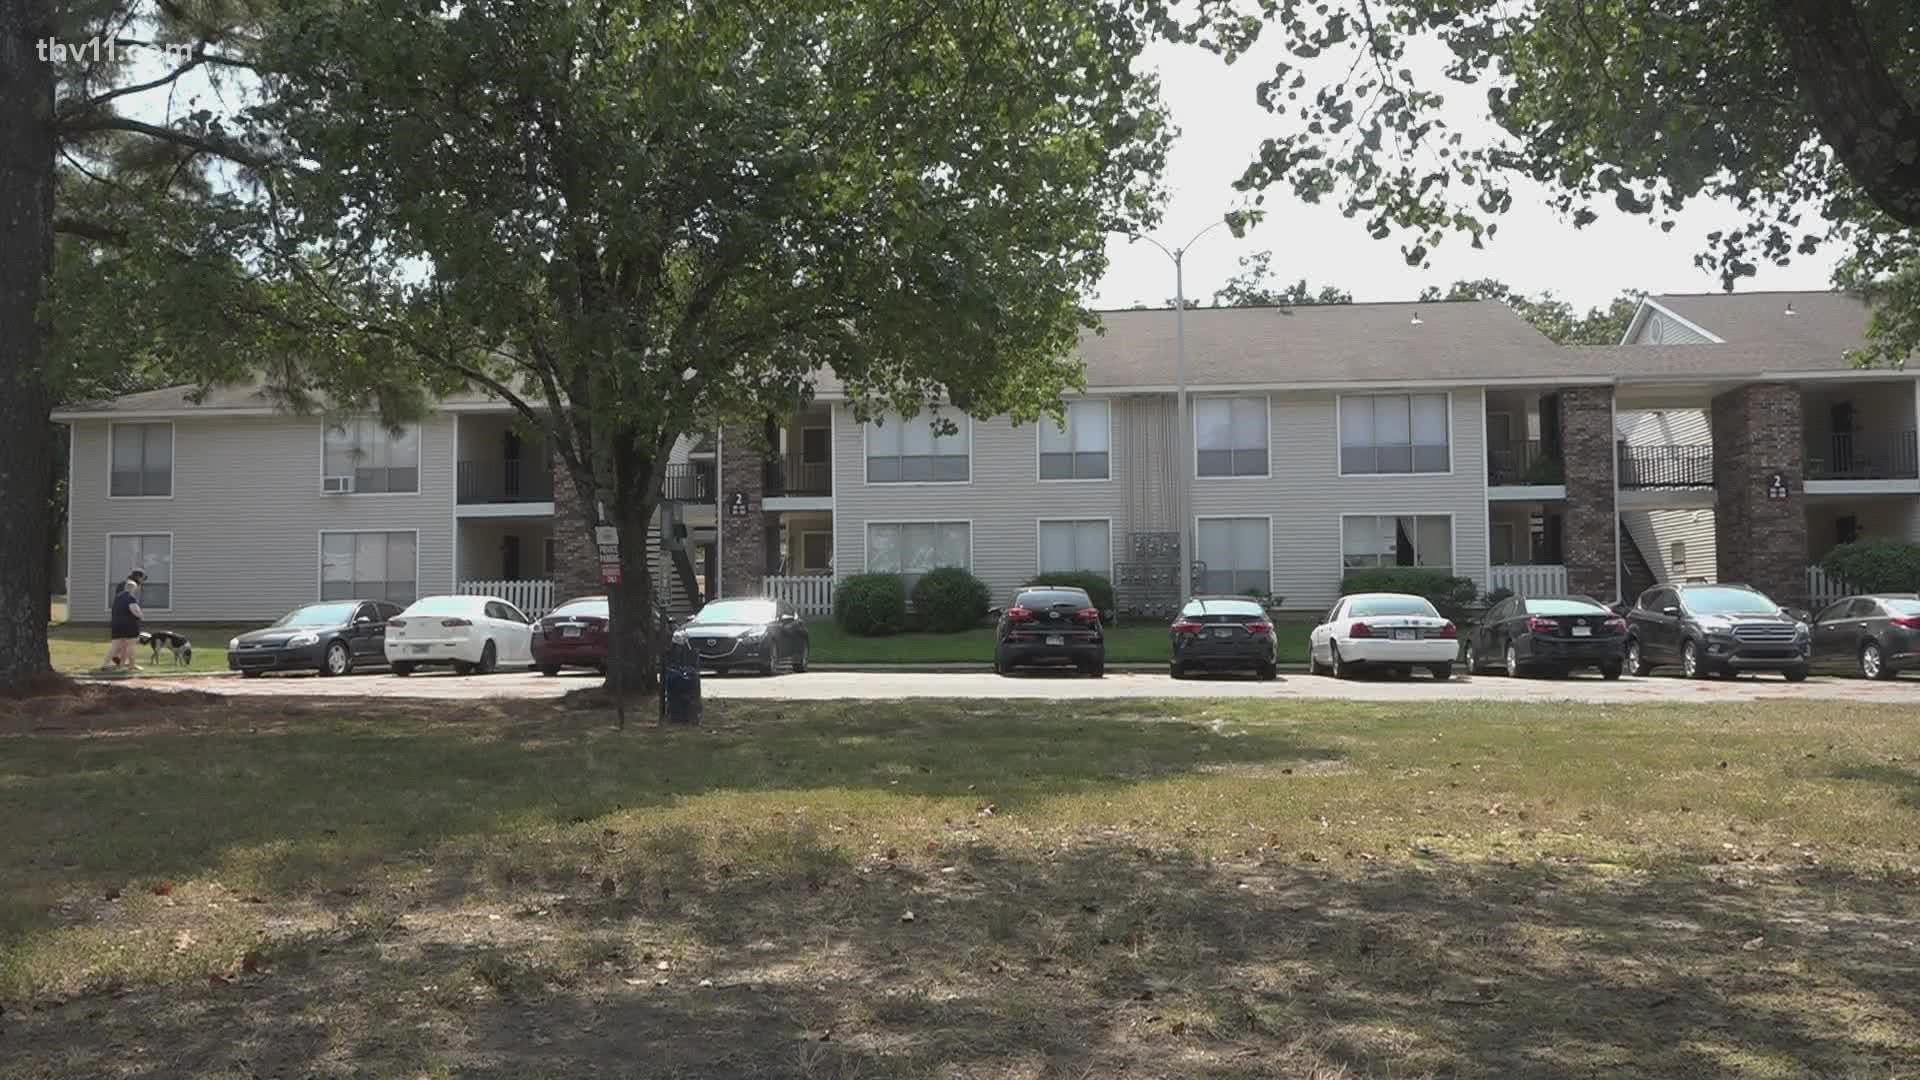 The North Little Rock Police Department is investigating a shooting that occurred Saturday night at the McCain Park Apartments.